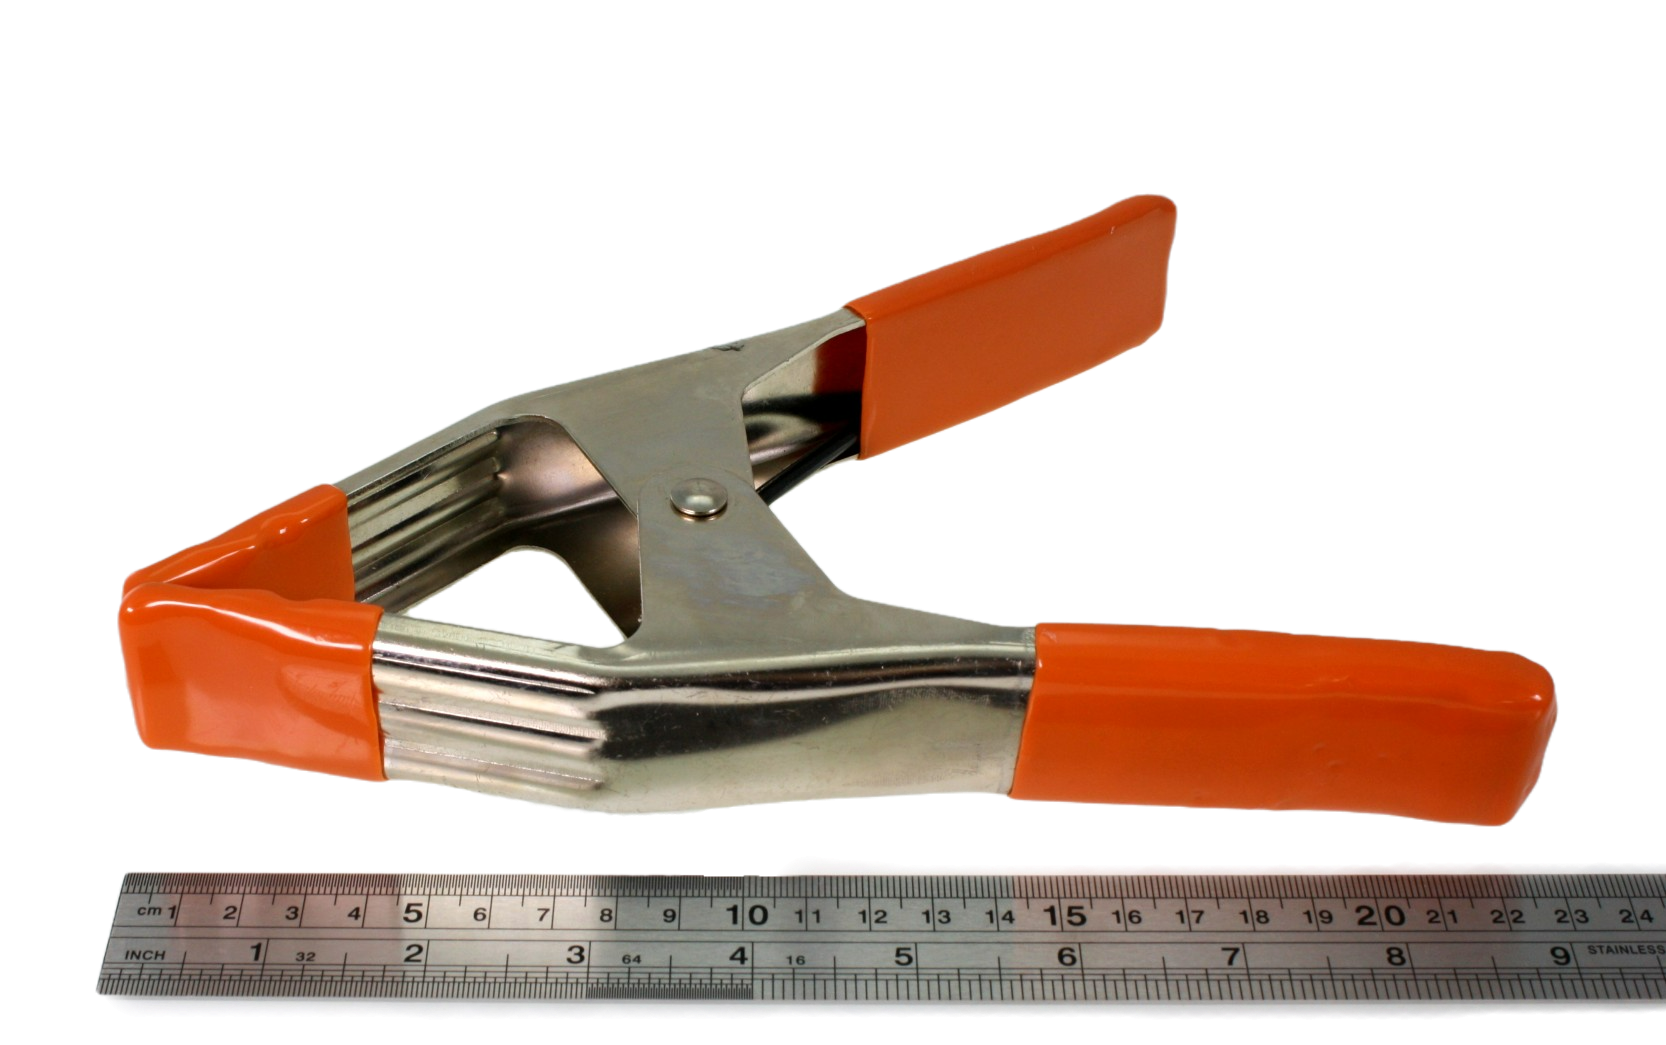 75mm clamp next to a ruler